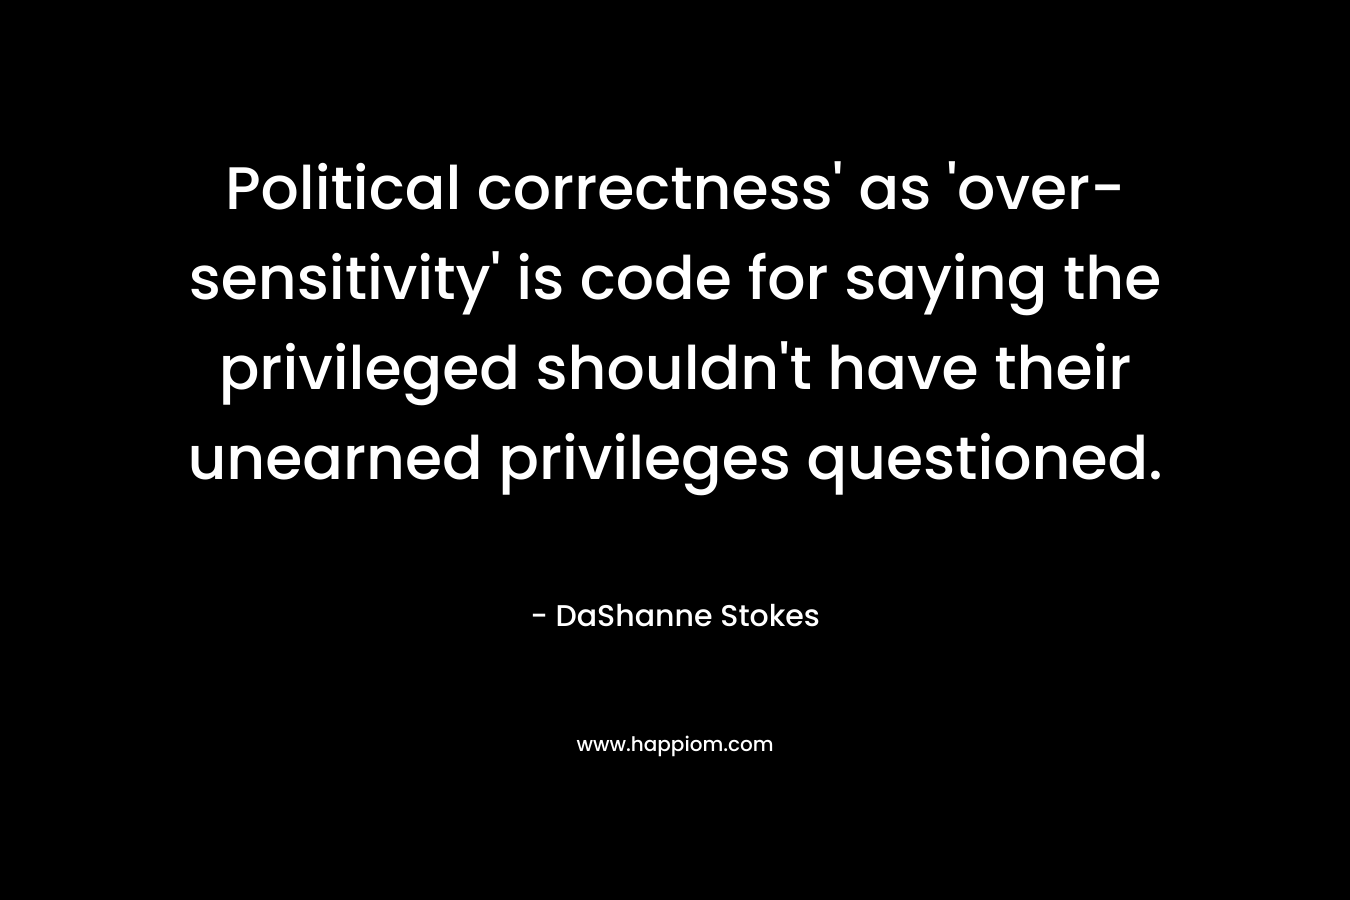 Political correctness' as 'over-sensitivity' is code for saying the privileged shouldn't have their unearned privileges questioned.